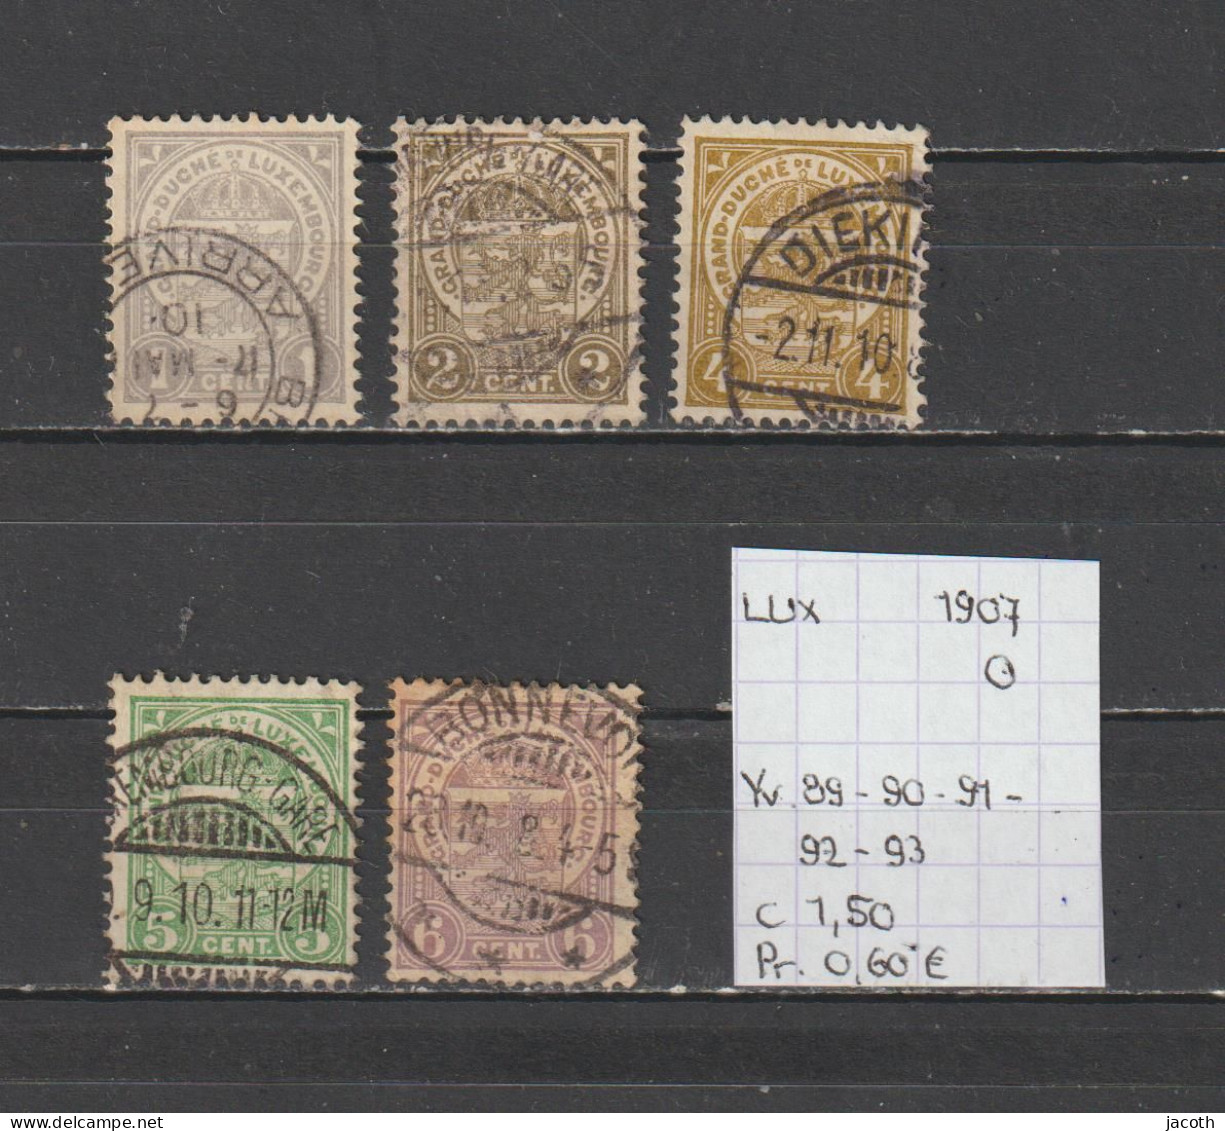 (TJ) Luxembourg 1907 - YT 89 + 90 + 91 + 92 + 93 (gest./obl./used) - 1907-24 Scudetto